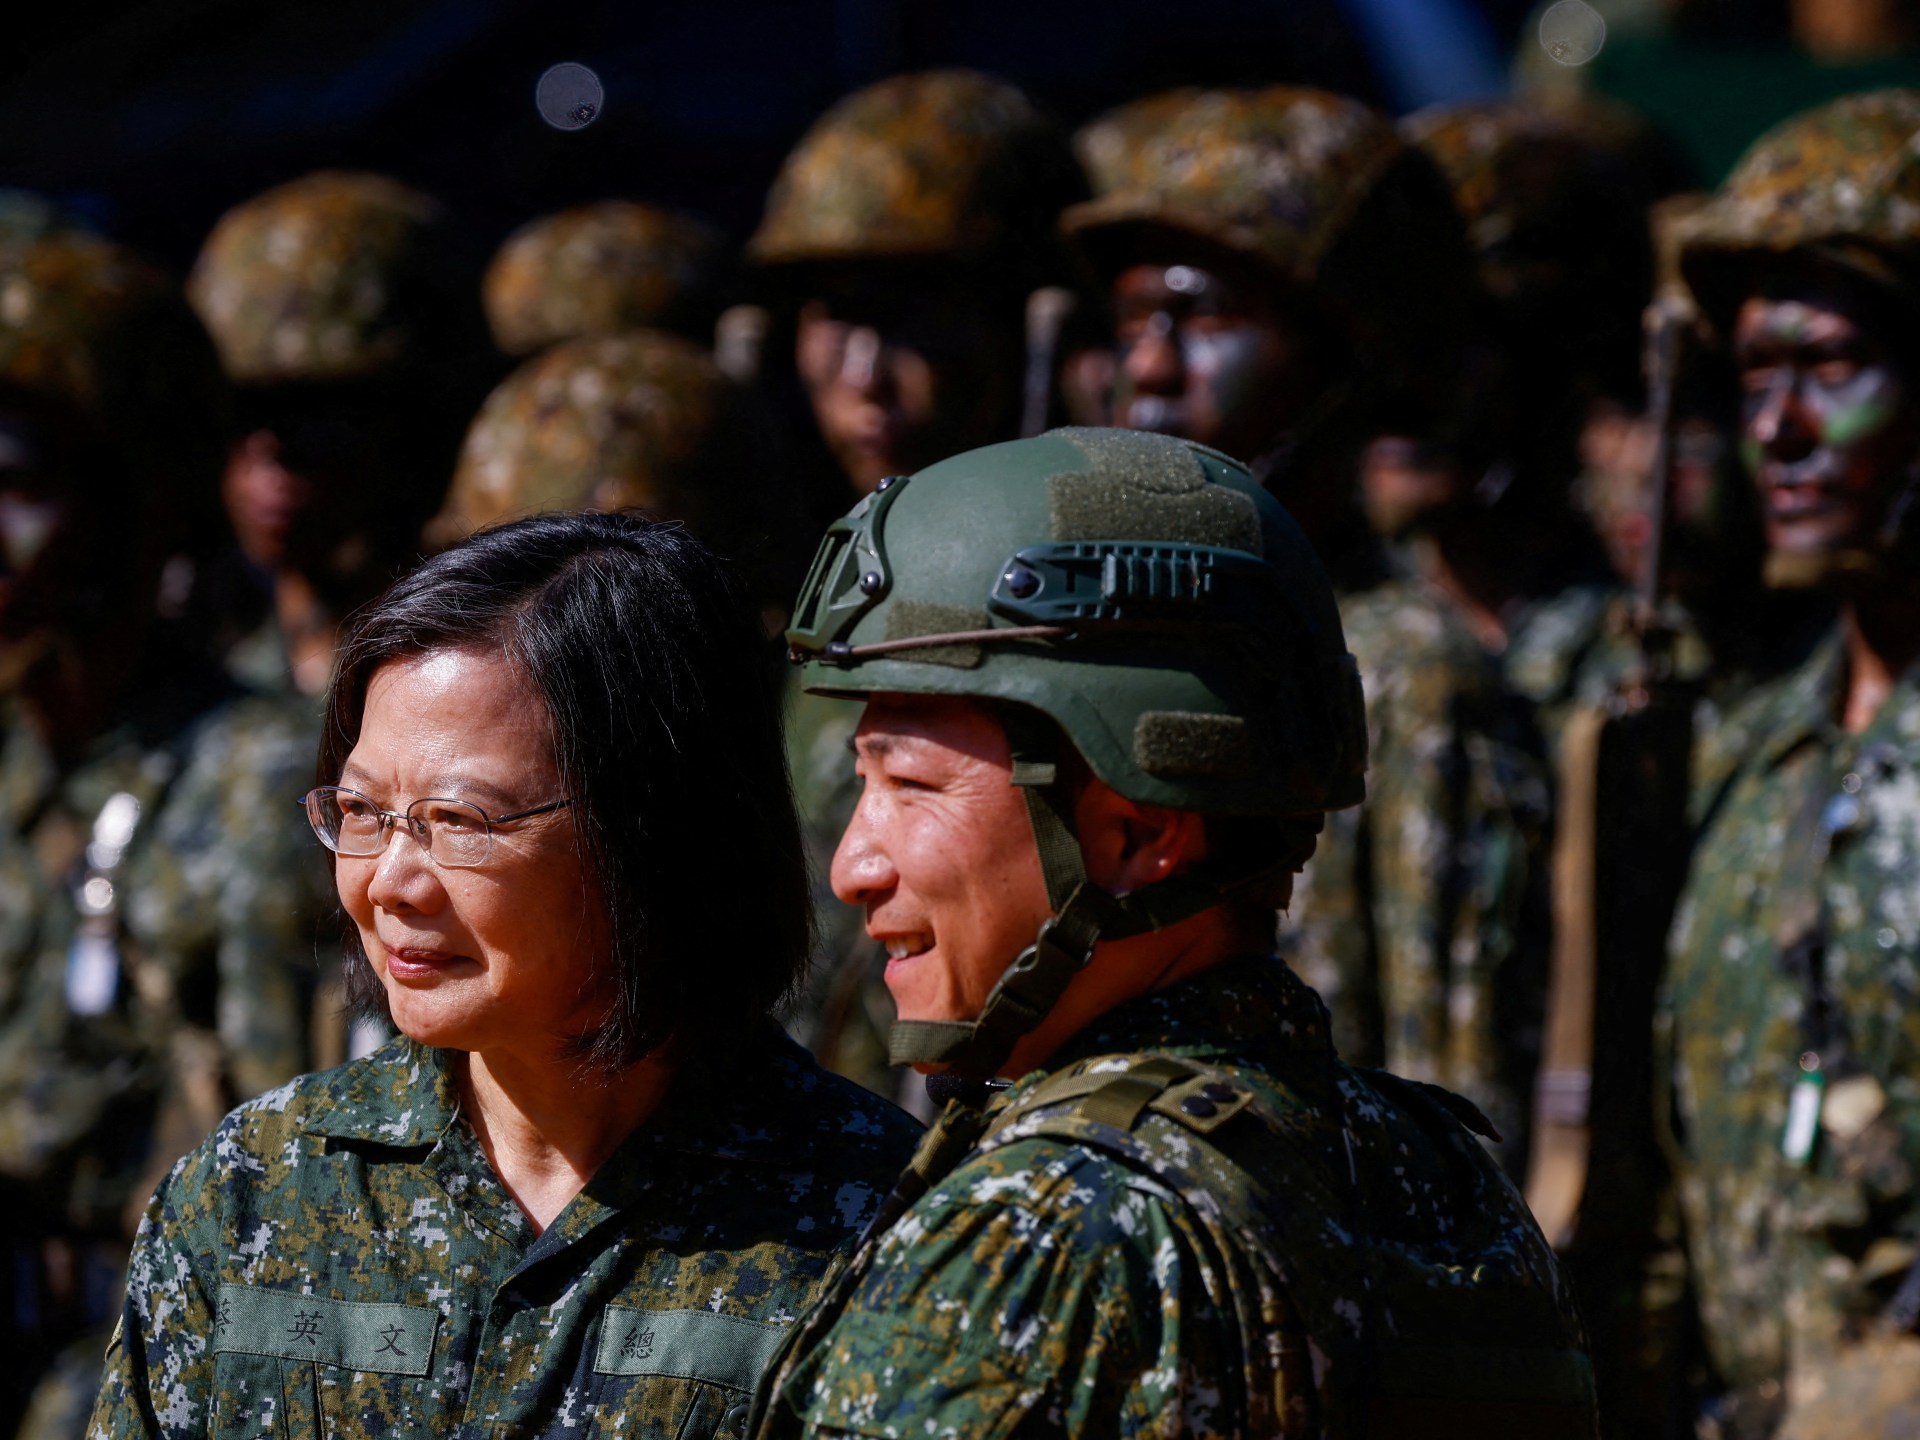 Taiwan’s Tsai Ing-wen says island’s future must be decided by its people | Politics News